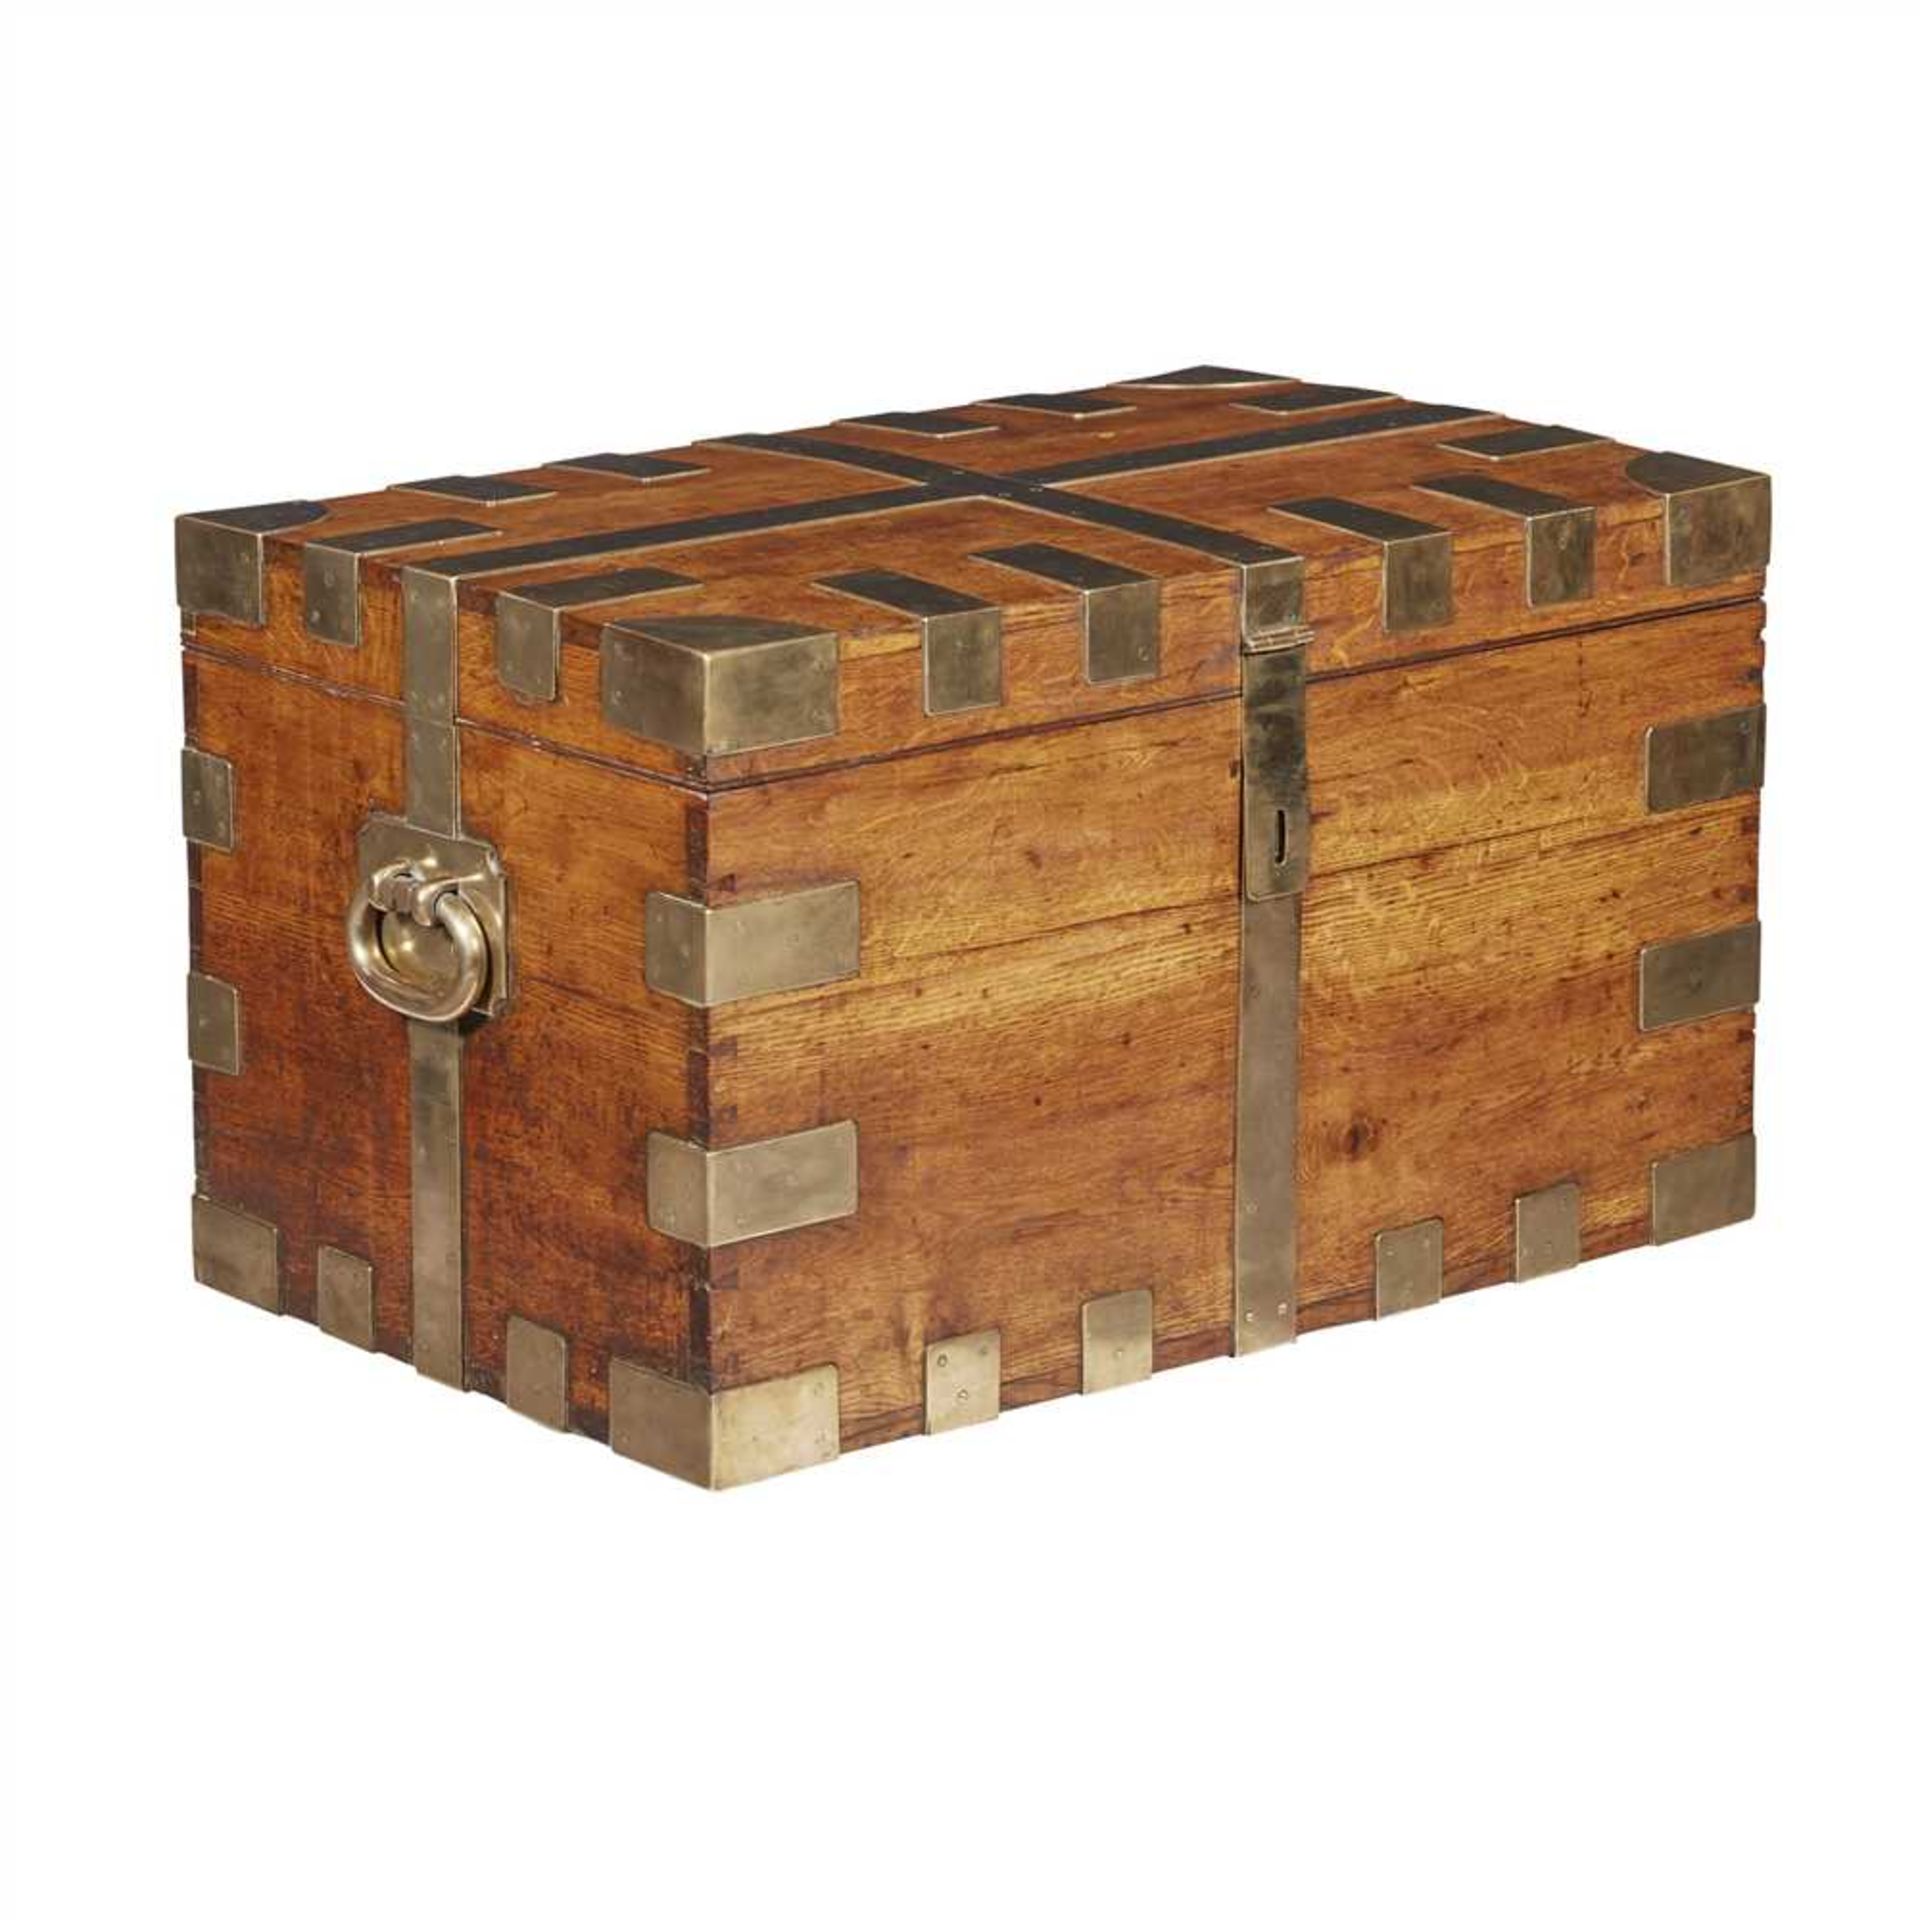 OAK AND BRASS BOUND SILVER CHEST LATE 19TH CENTURY